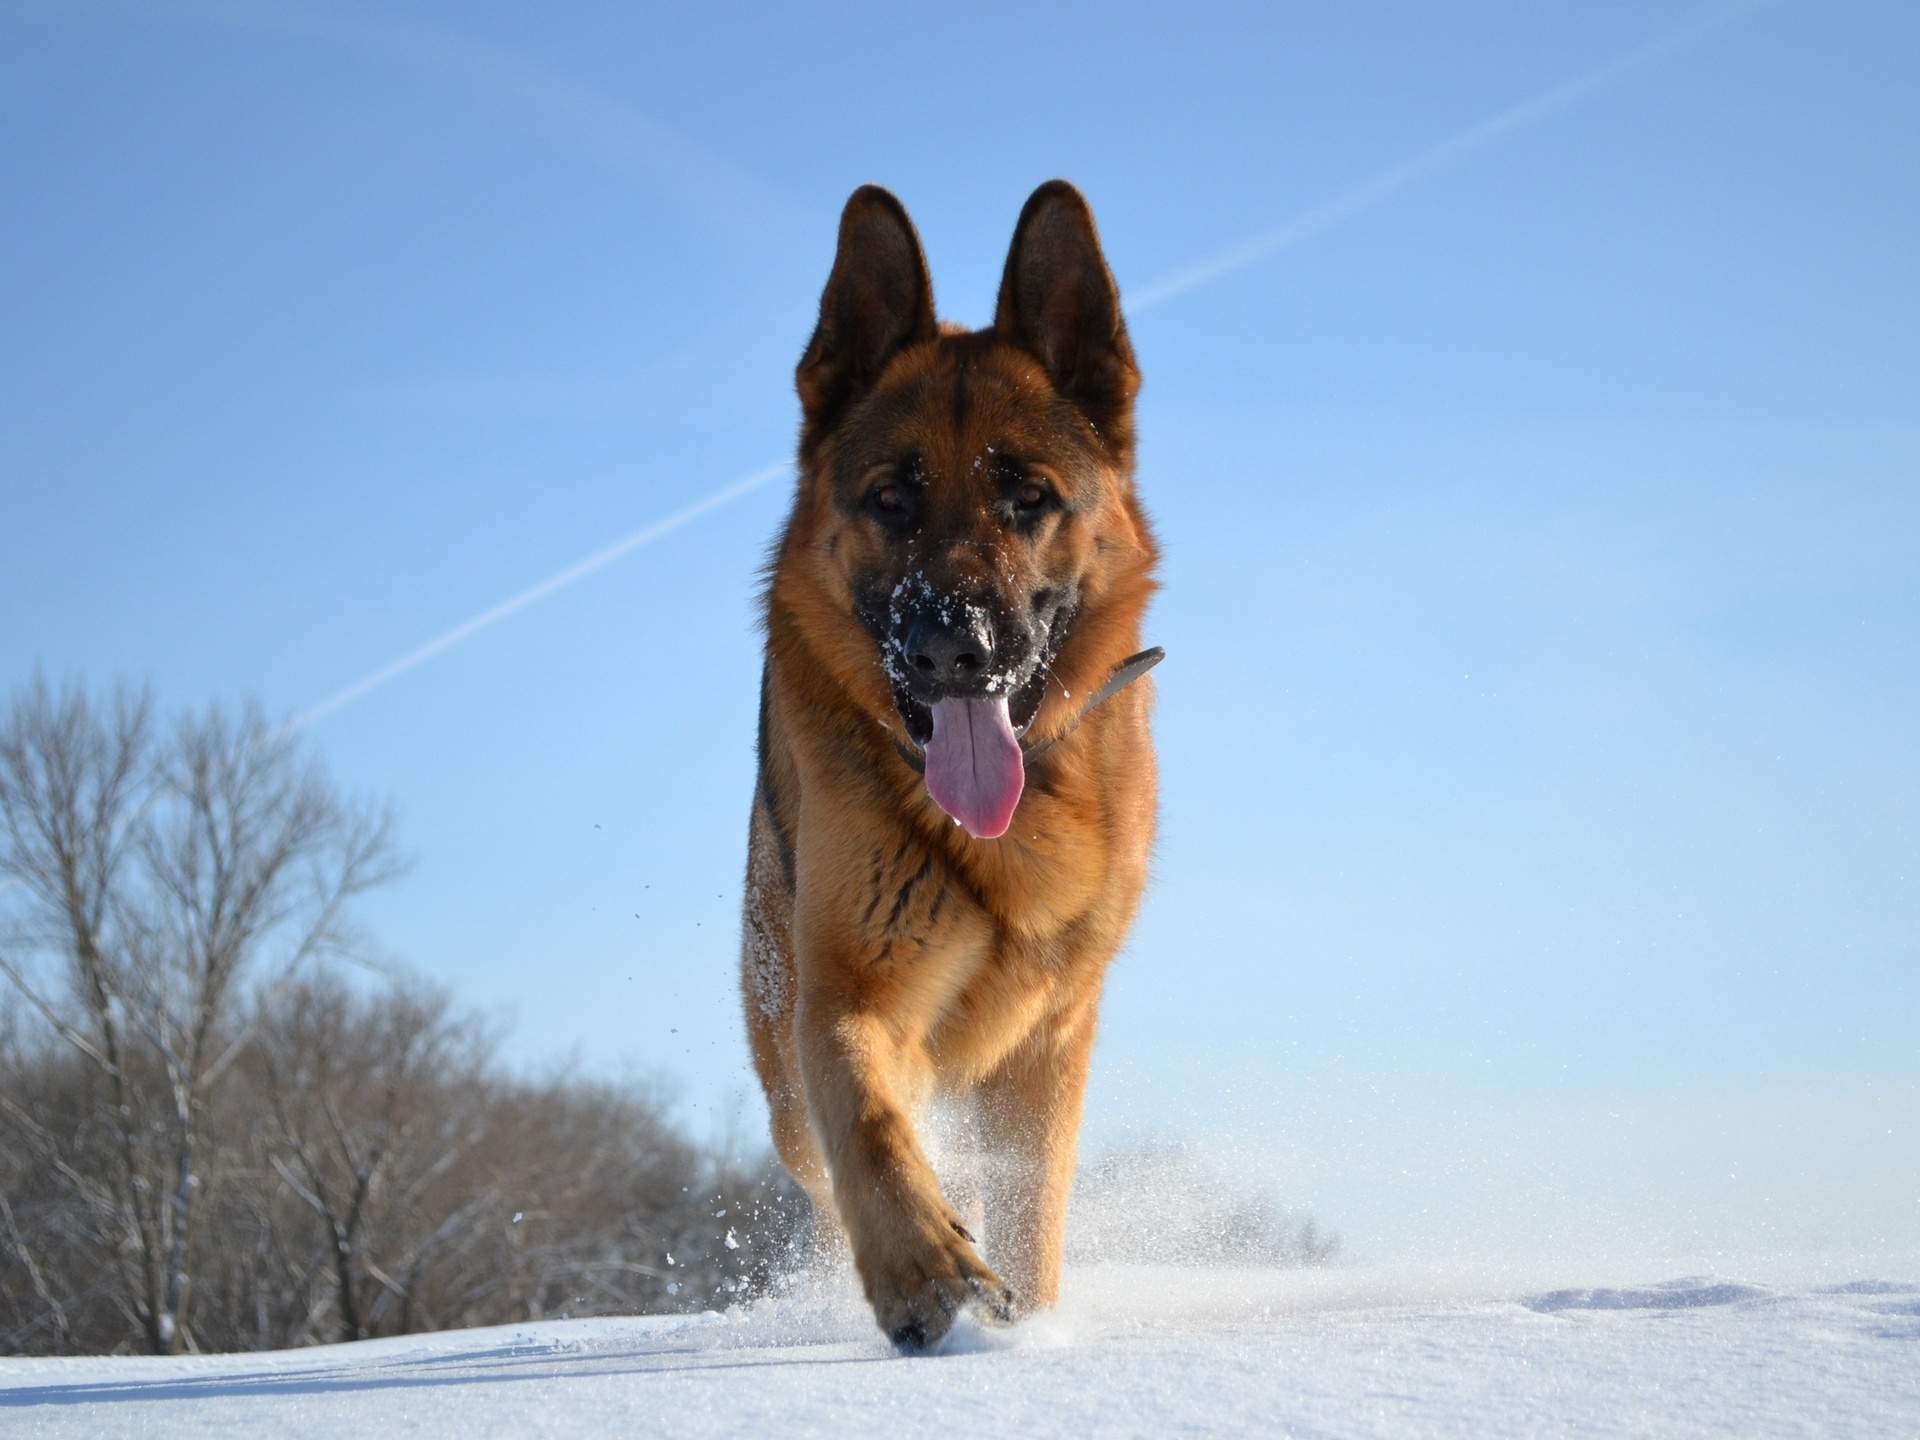 German Shepherd on a winter day wallpapers and images - wallpapers ...